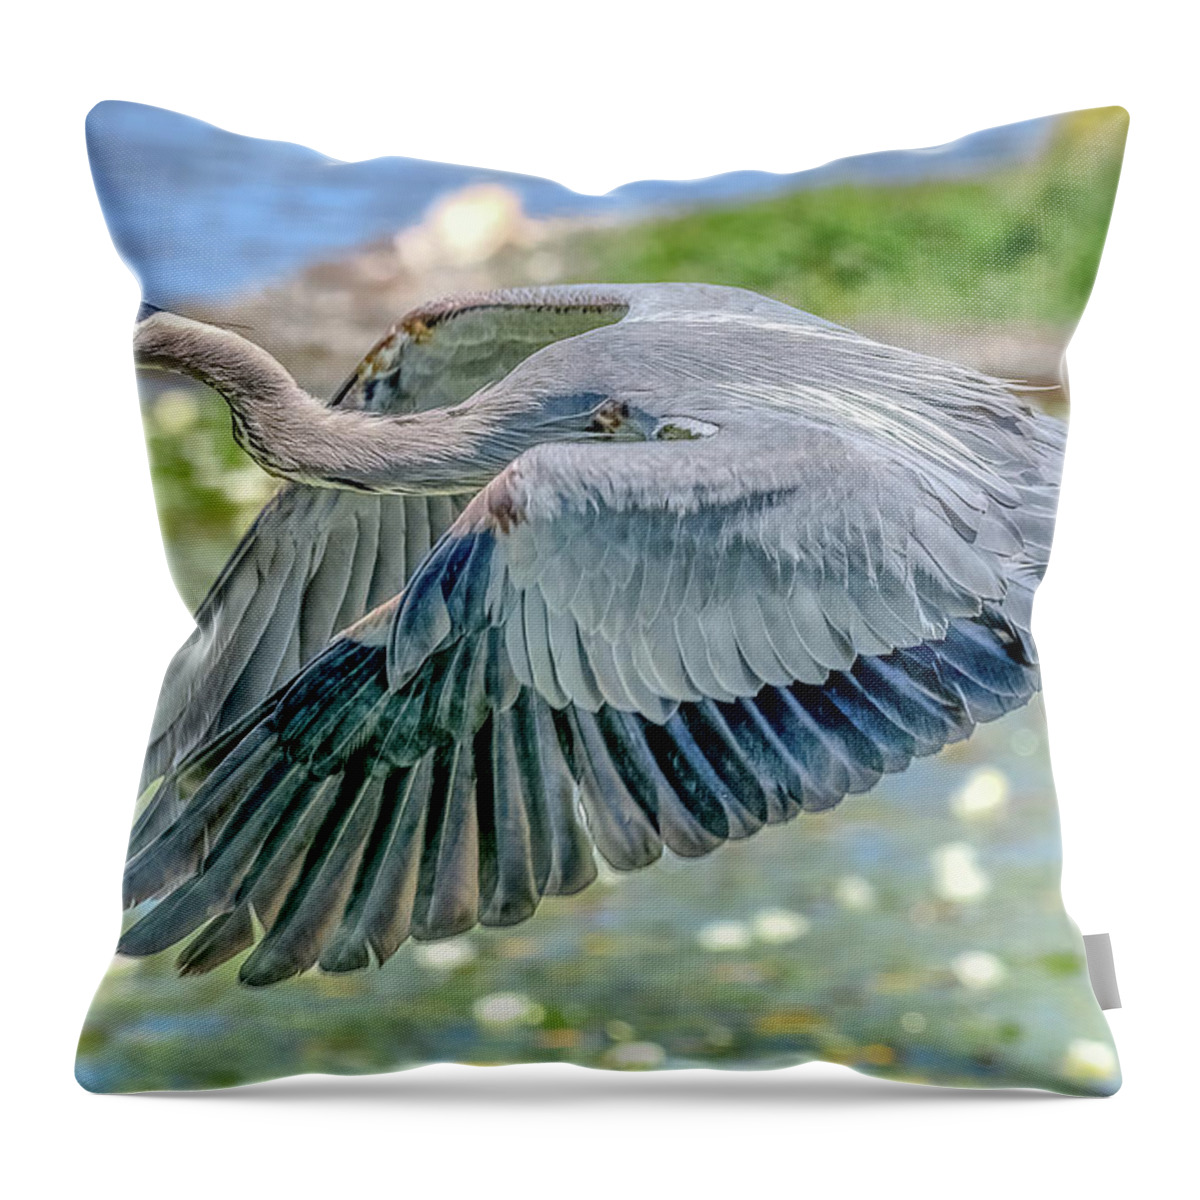 Blue Heron Throw Pillow featuring the photograph Great Blue Heron by Jerry Cahill